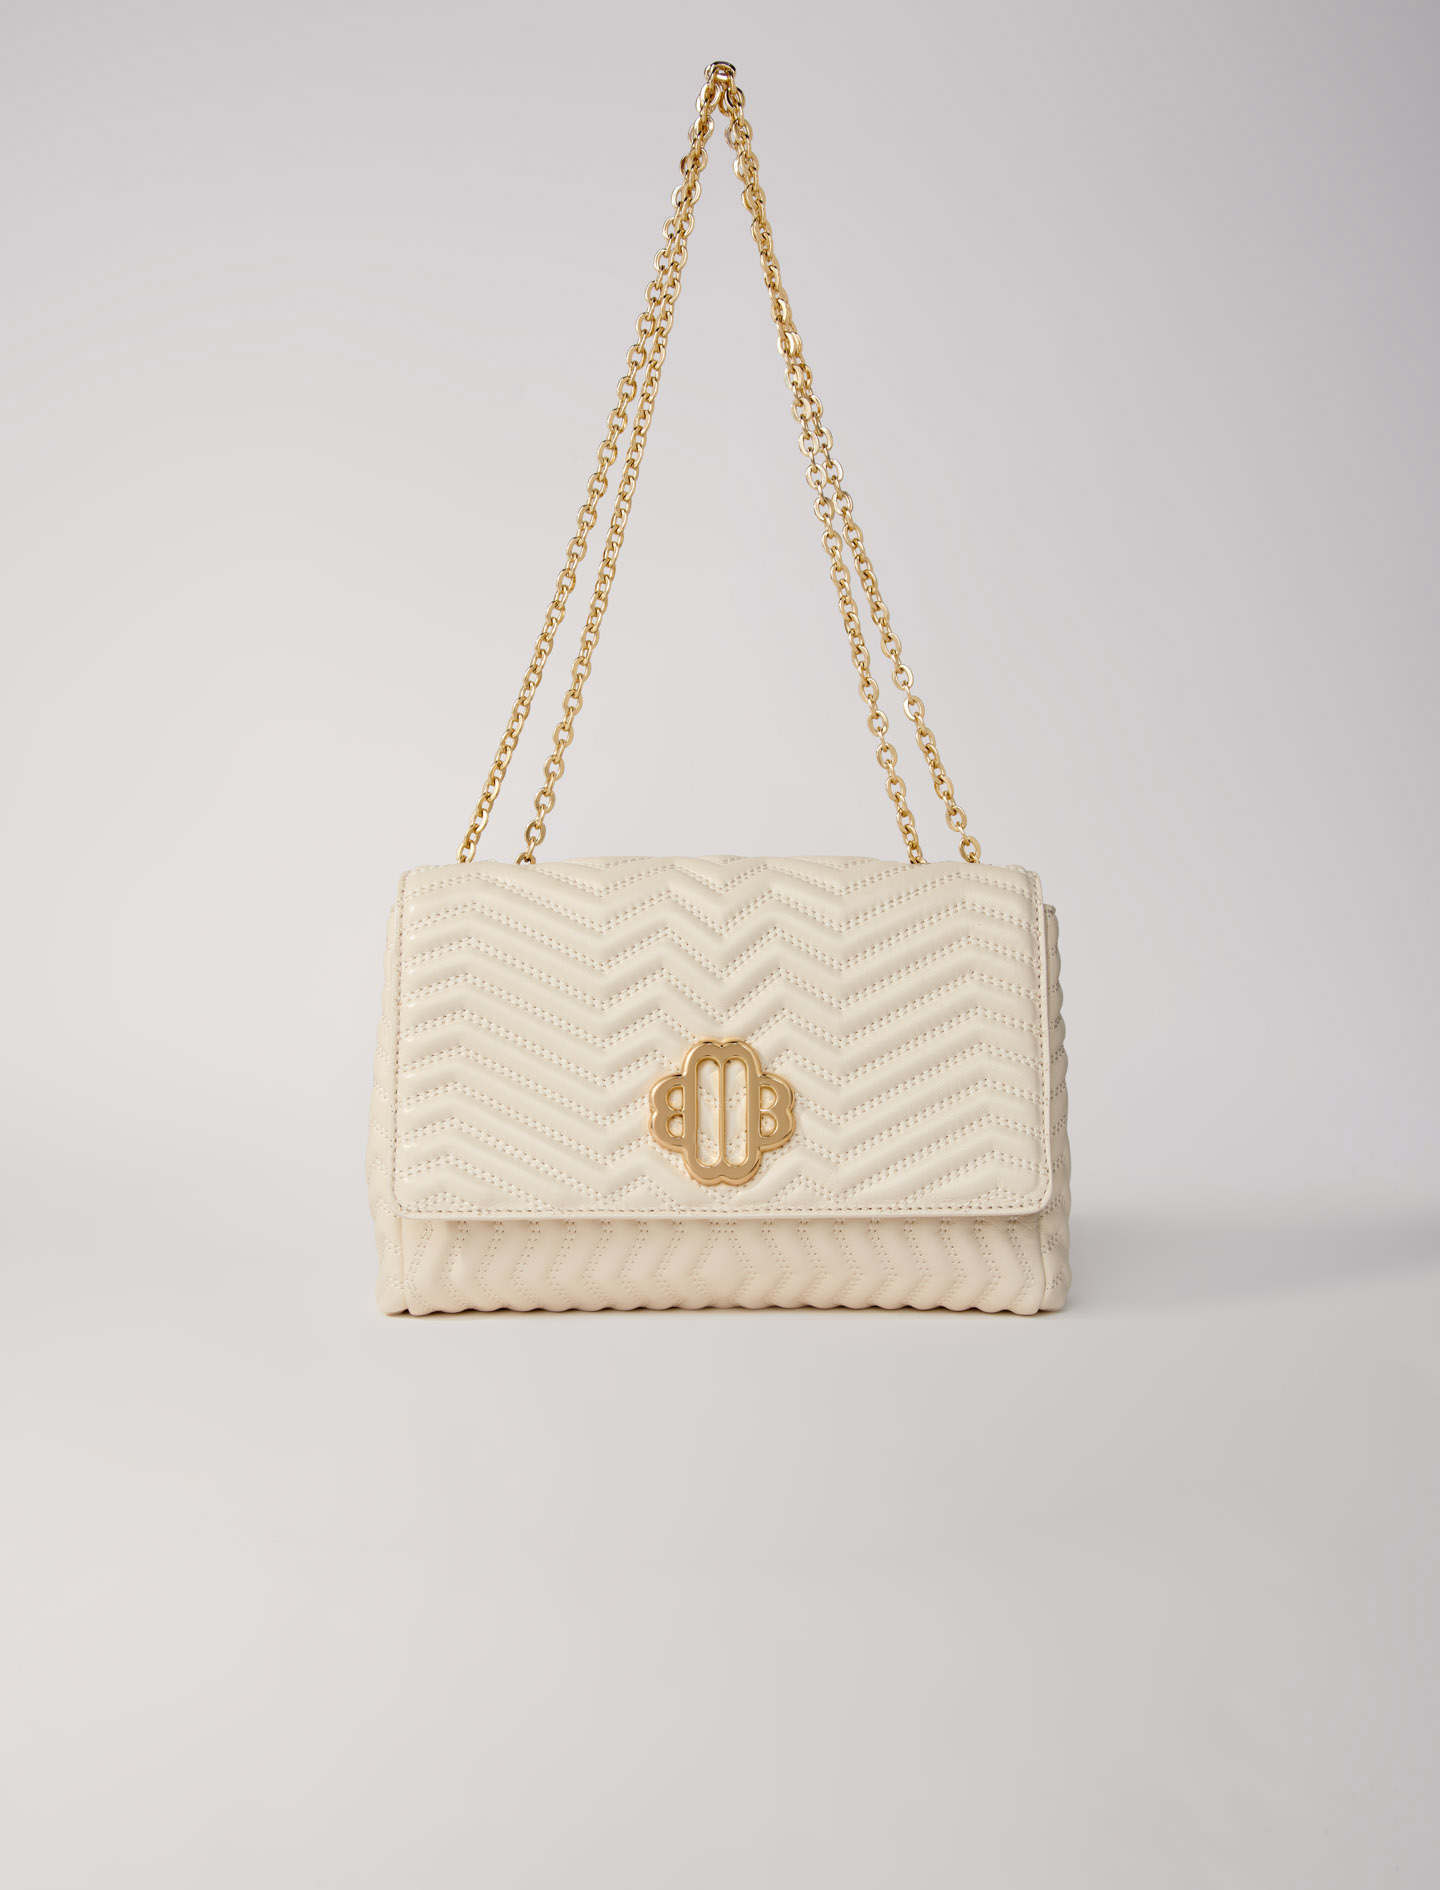 Maje Woman's cotton Coating: Leather bag with chain strap for Spring/Summer, in color Vanilla Ecru /